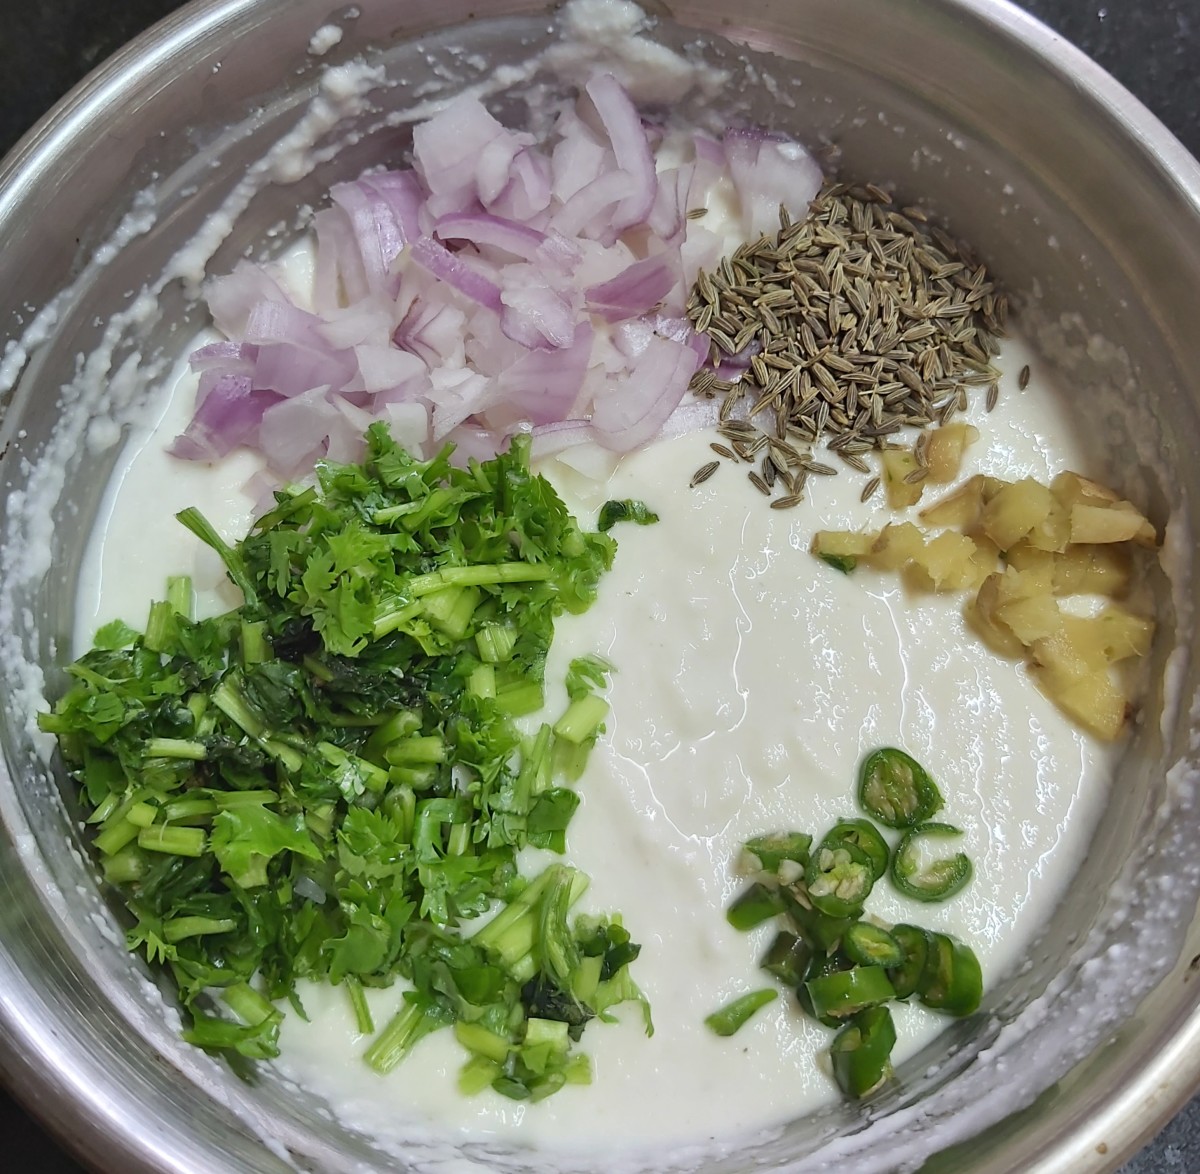 To this batter, add 1-2 finely chopped onions, 1 teaspoon cumin seeds, 2-3 tablespoons of finely chopped fresh coriander leaves, 1-2 finely chopped green chilies, 1 inch long finely chopped  fresh ginger.